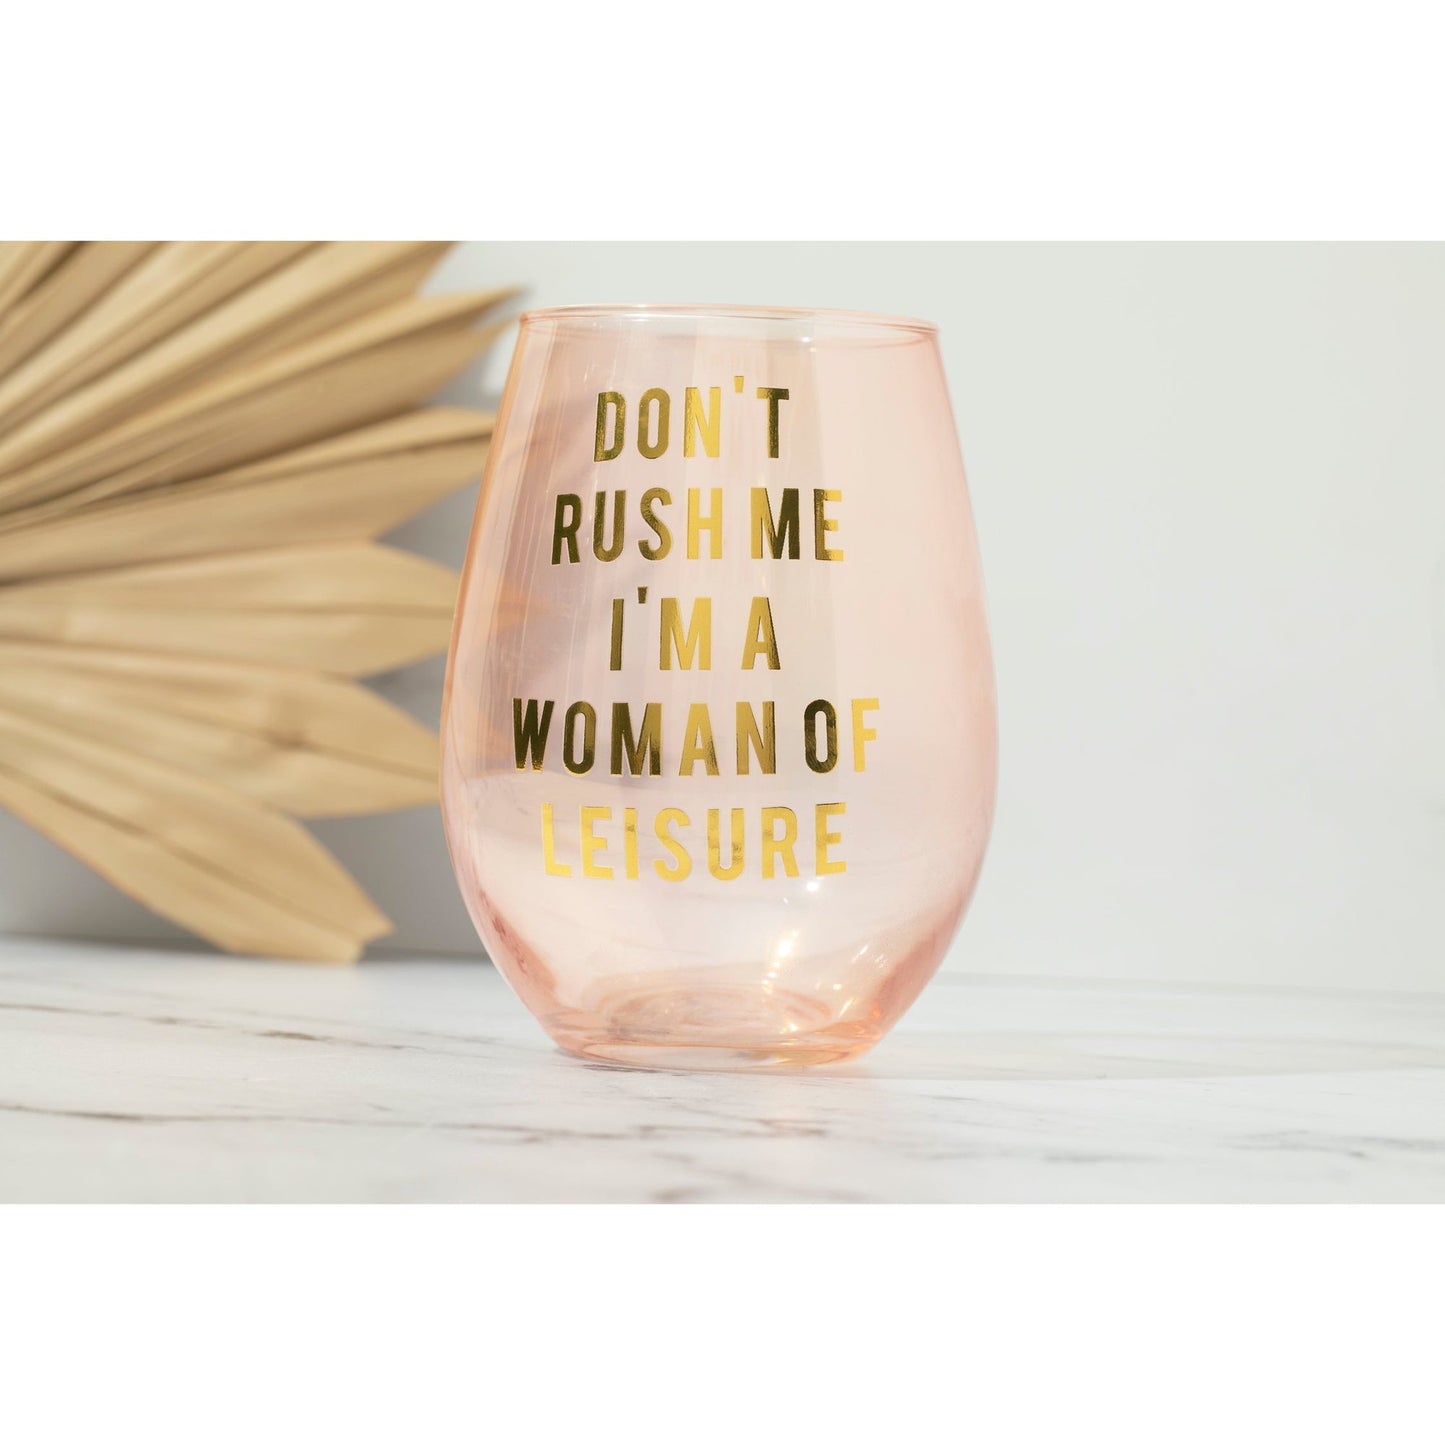 Don't Rush Me, I'm a Woman Of Leisure Stemless Wine Glass in Rose and Gold | 20 0z. | Set of 6